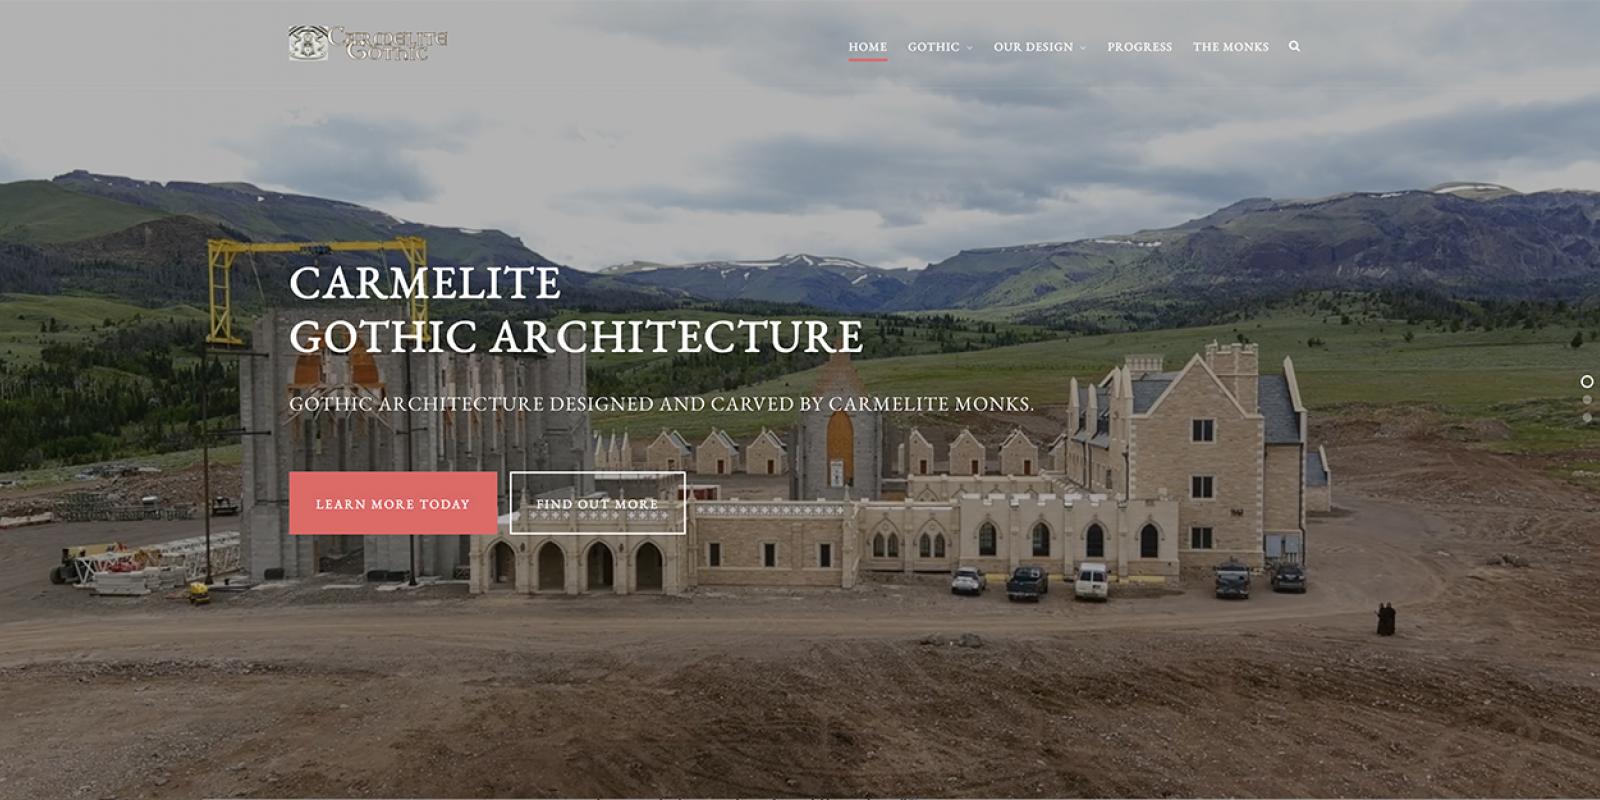 The website of the monks building their monastery